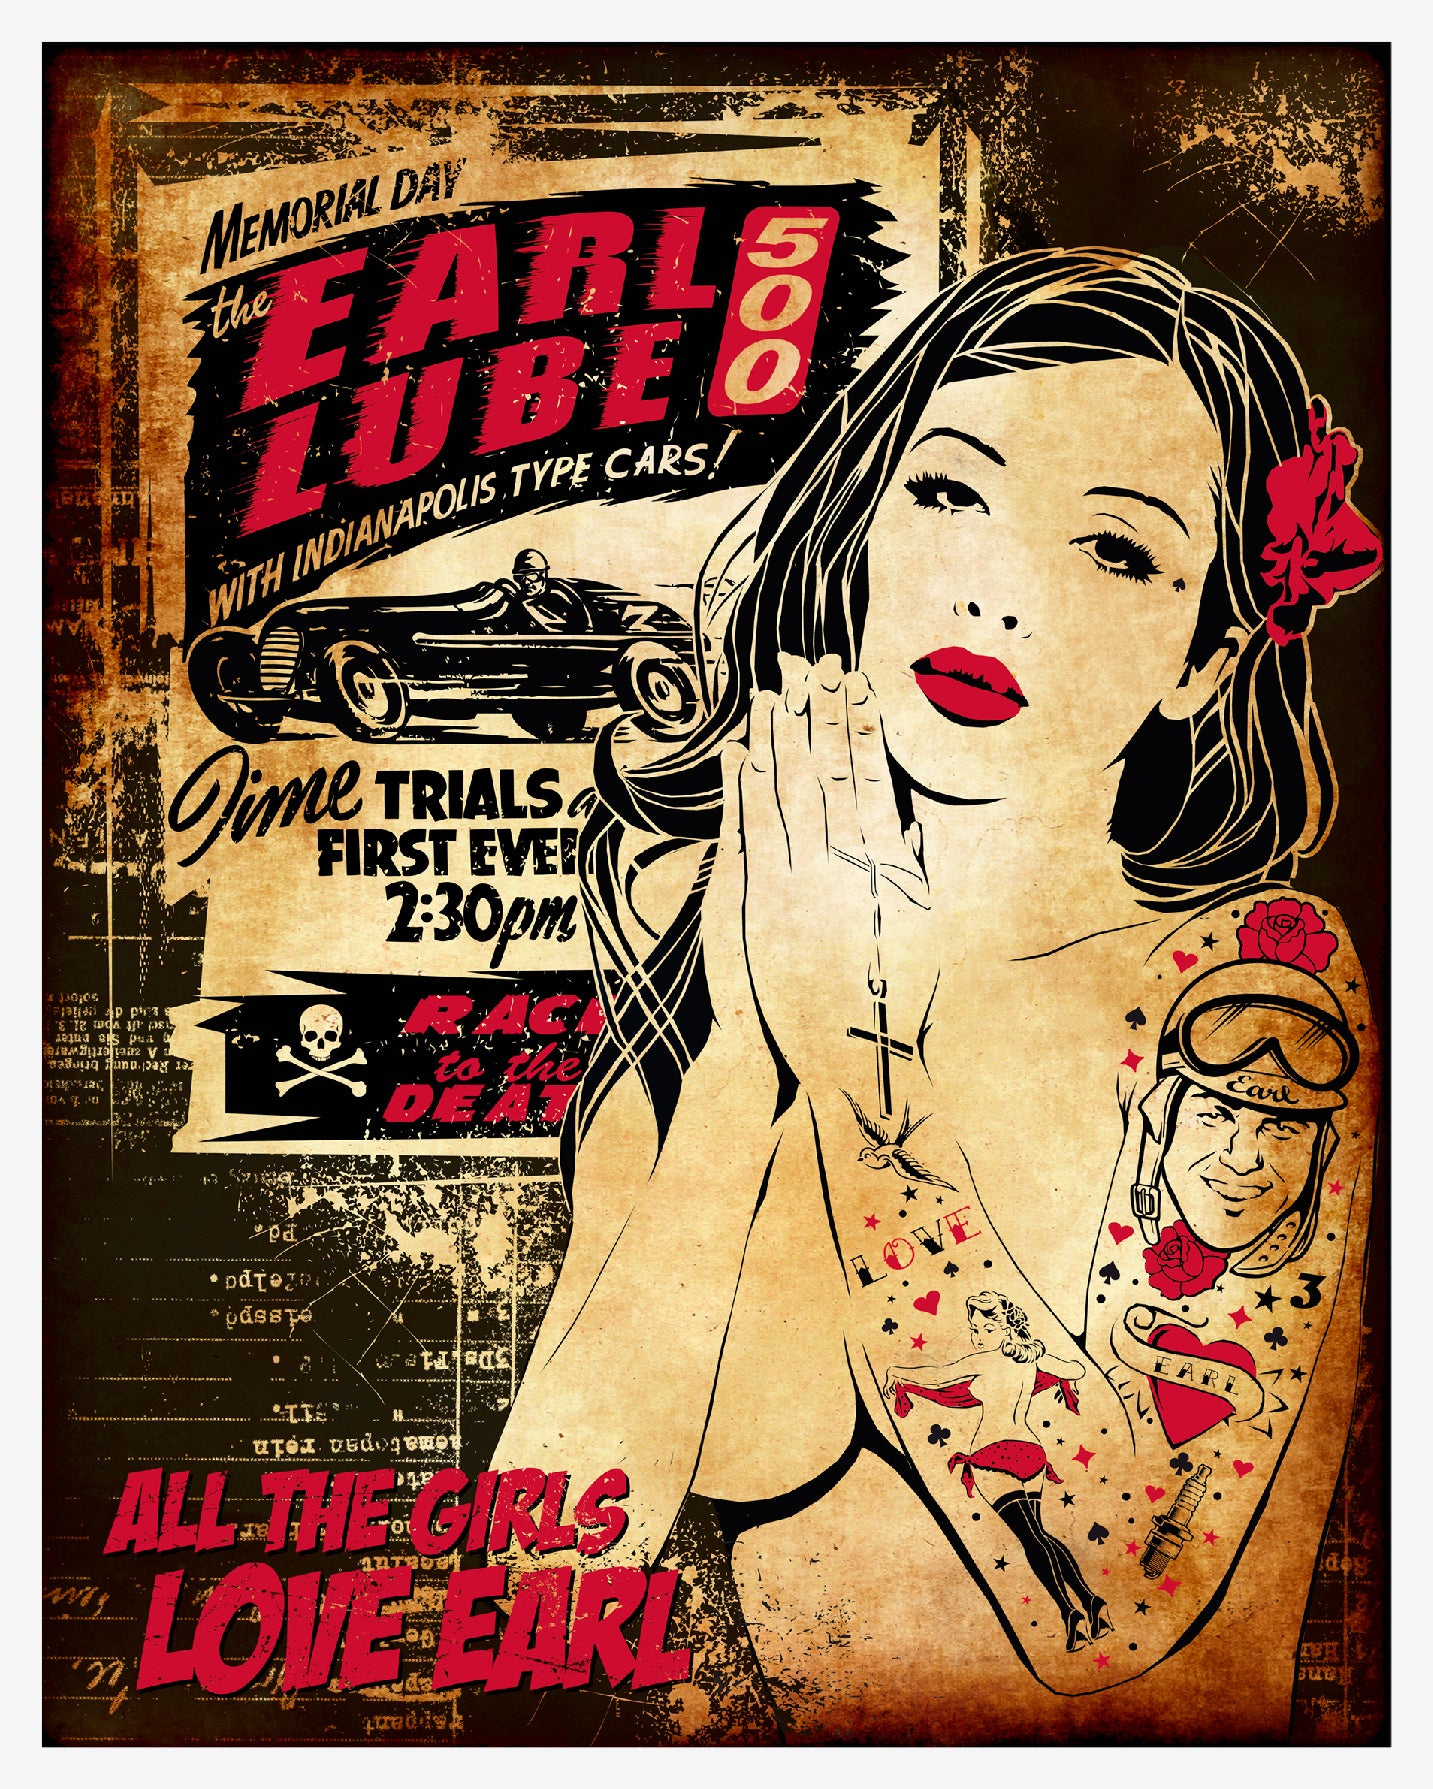 Earl Lube 500 Sticker: A collaboration between Earl Lee and German stencil artist Mittenimwald. This sticker showcases a topless praying beauty against a vintage burnt paper backdrop, alongside the "Earl Lube 500" event poster, complemented by the timeless "All The Girls Love Earl" slogan at the bottom.